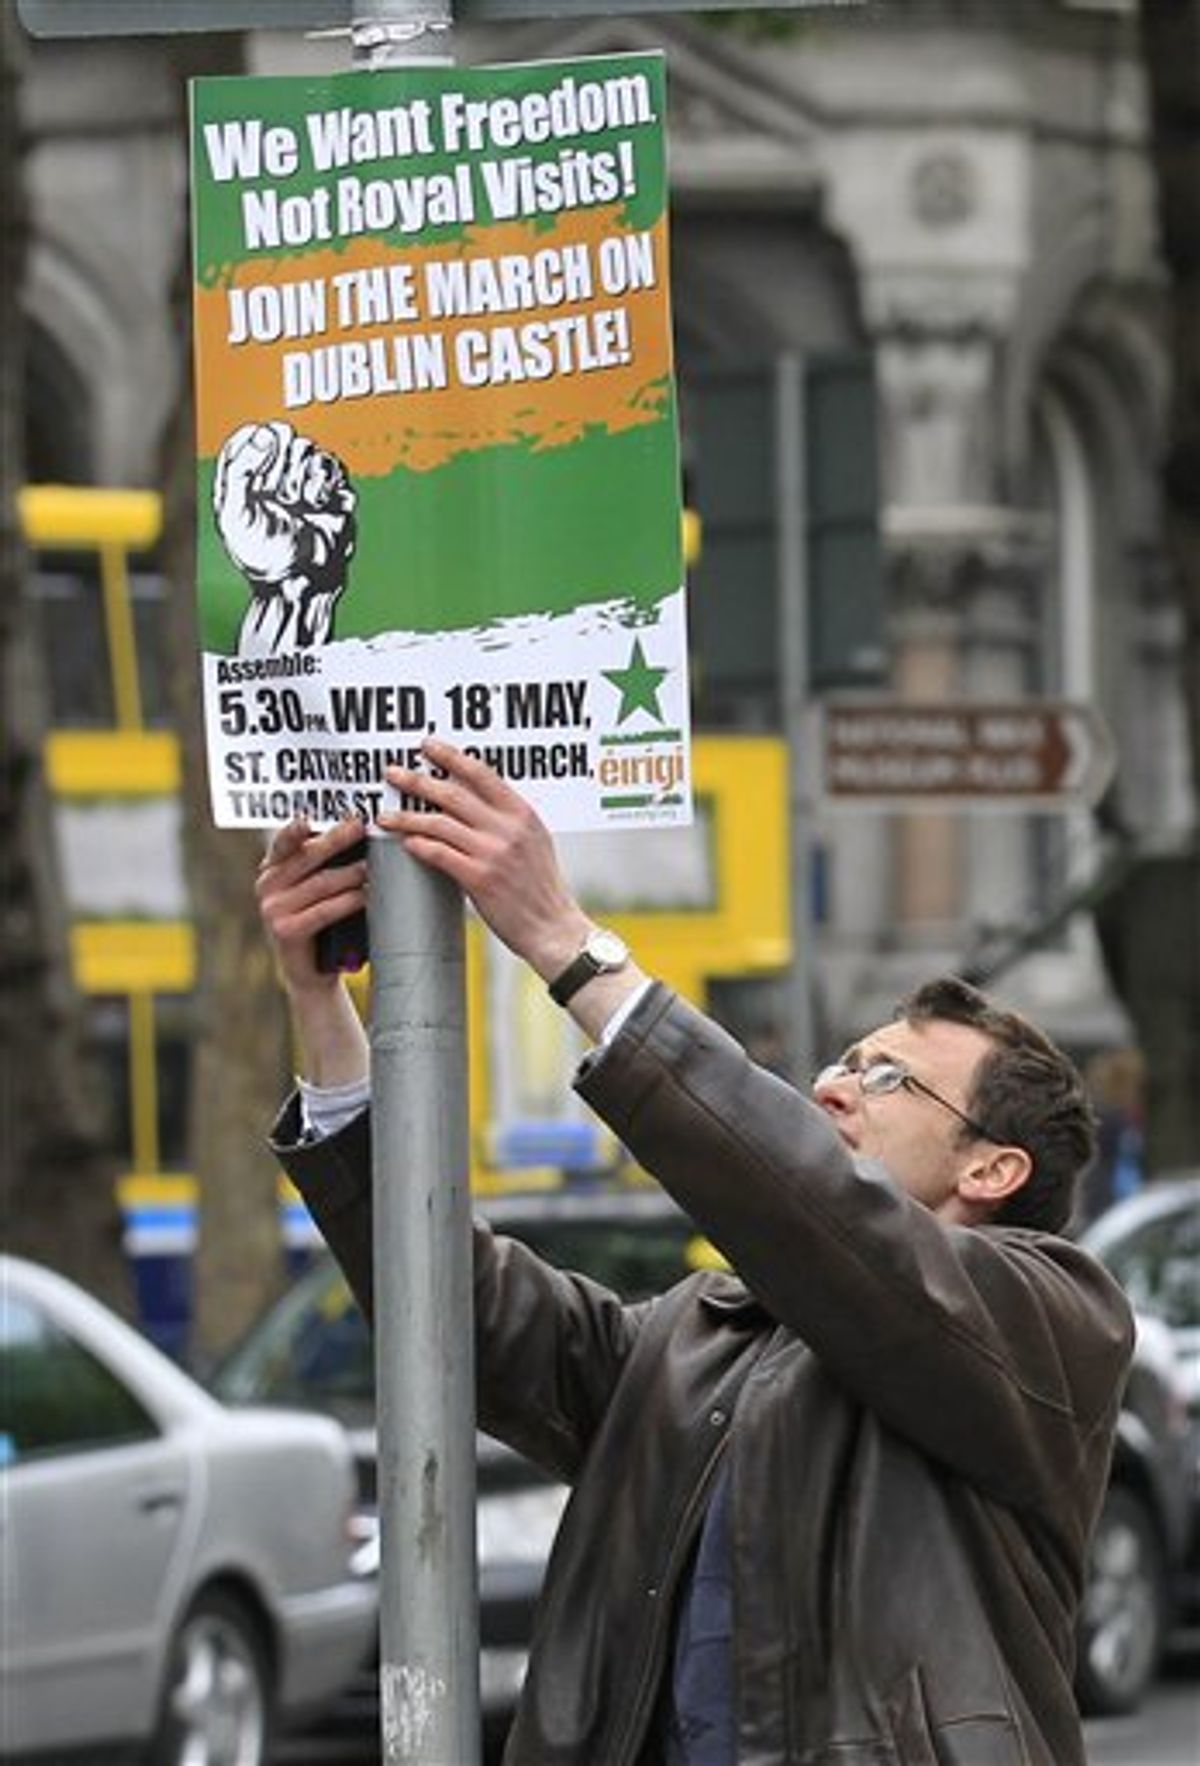 A protester puts up a placard to protest at the visit by Britain's Queen Elizabeth II to Ireland, Monday, May, 16, 2011.  Queen Elizabeth II begins a four day visit to Ireland on Tuesday for the first time since Irish Independence.  (AP Photo/Peter Morrison) (AP)